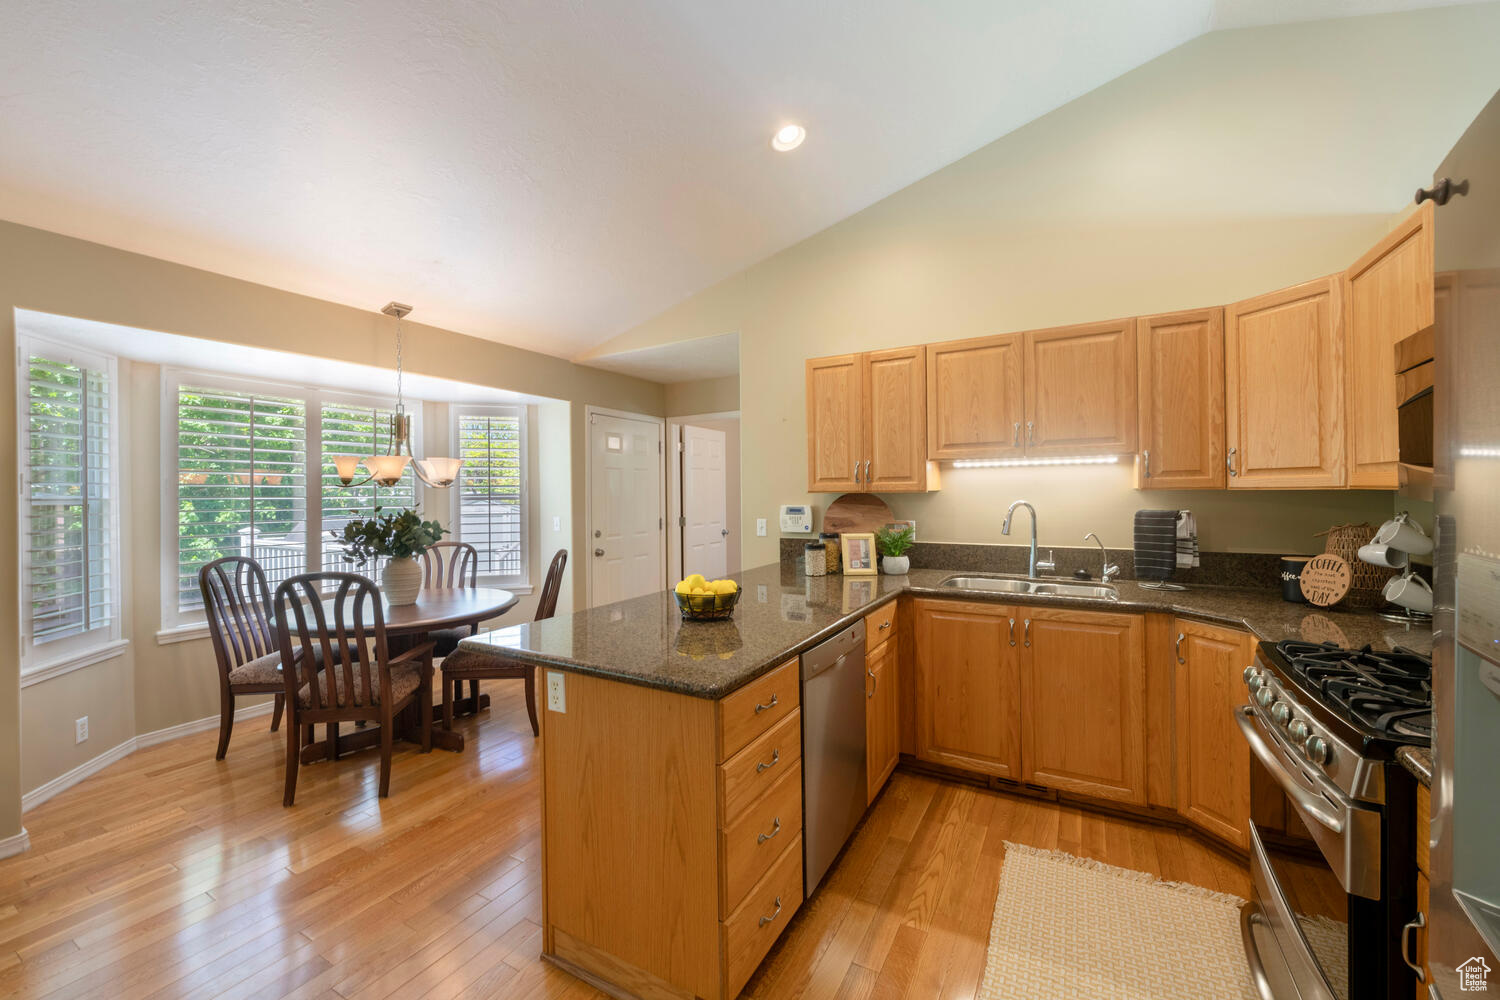 Kitchen - Dining featuring large windows, vaulted ceiling, kitchen peninsula, and light hardwood floors